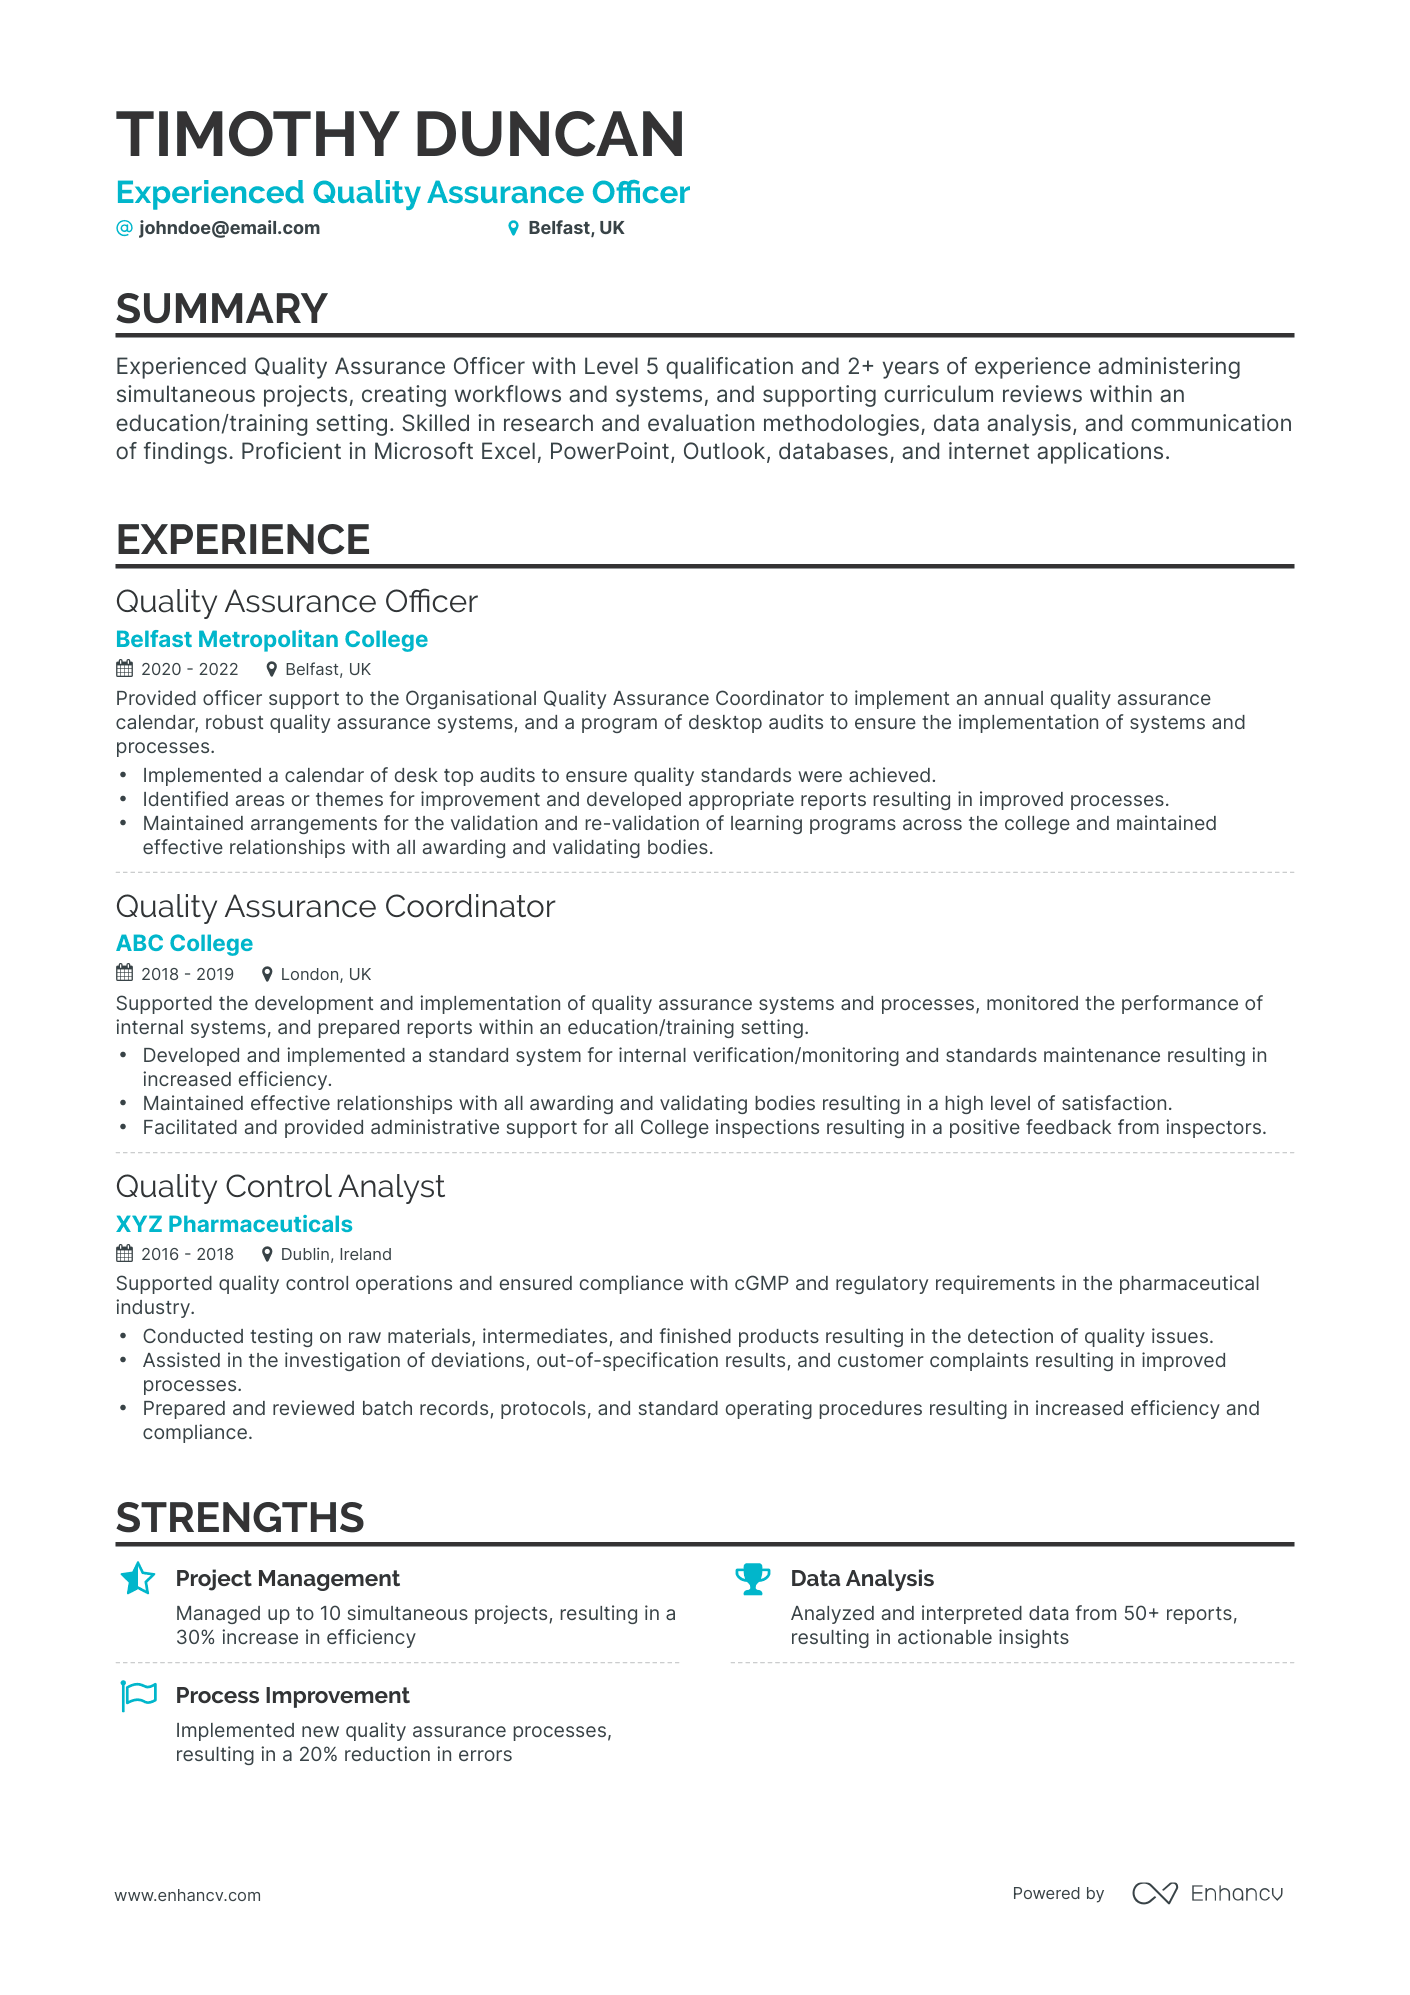 Classic Quality Assurance Officer Resume Template